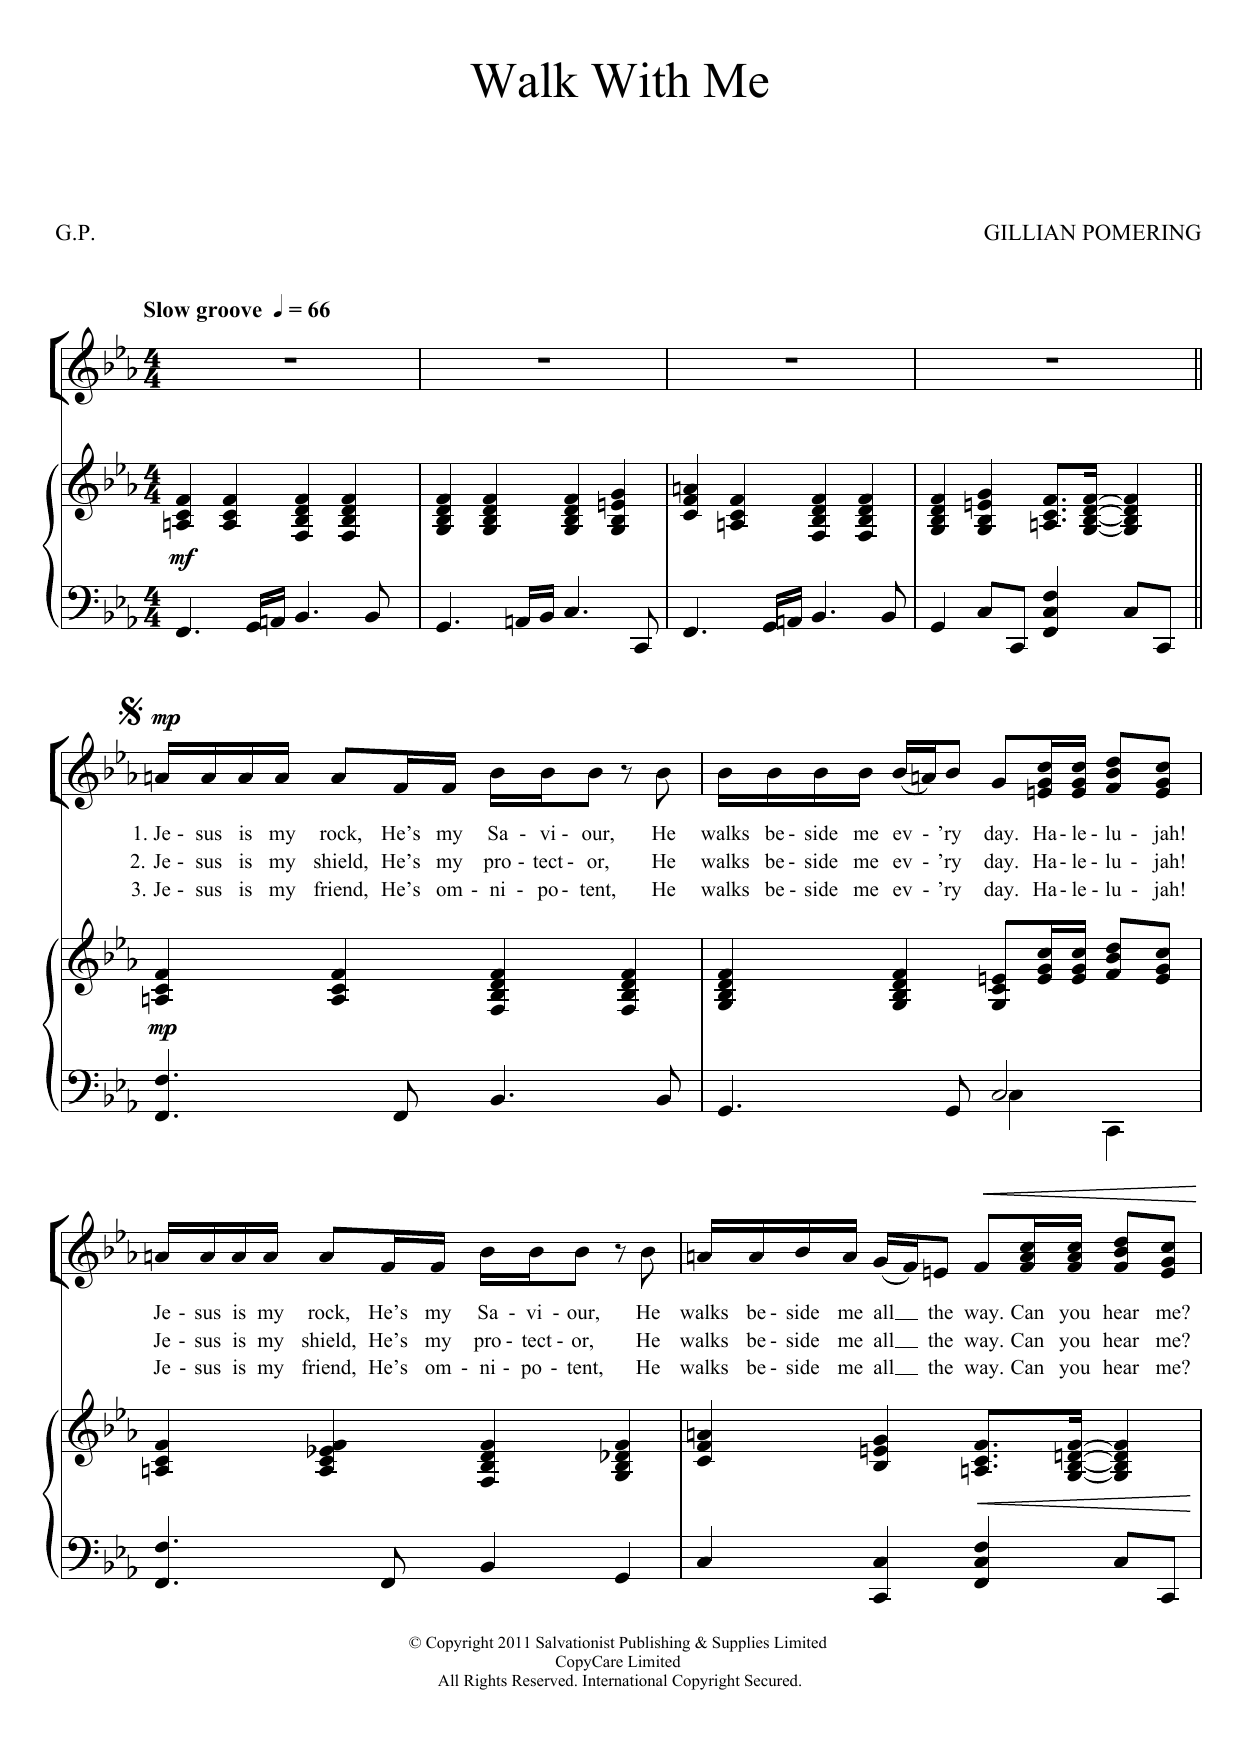 Download The Salvation Army Walk With Me Sheet Music